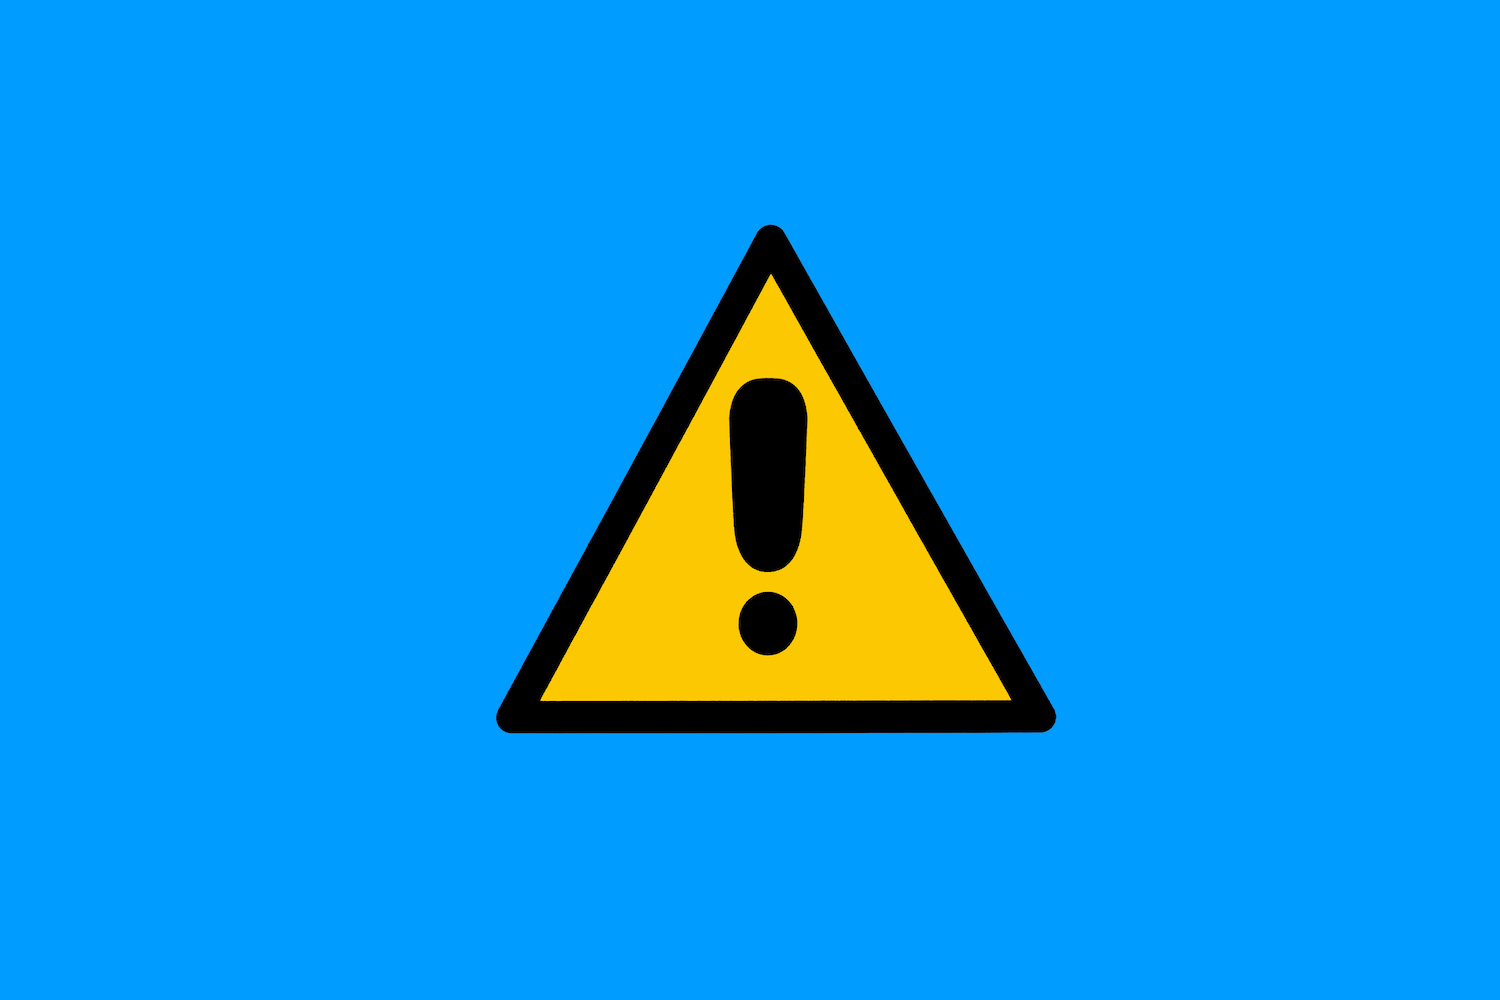 Warning sign with yellow and black triangle with exclamation mark on blue background.  Danger, risk, caution, caution, road sign and maintenance concept.